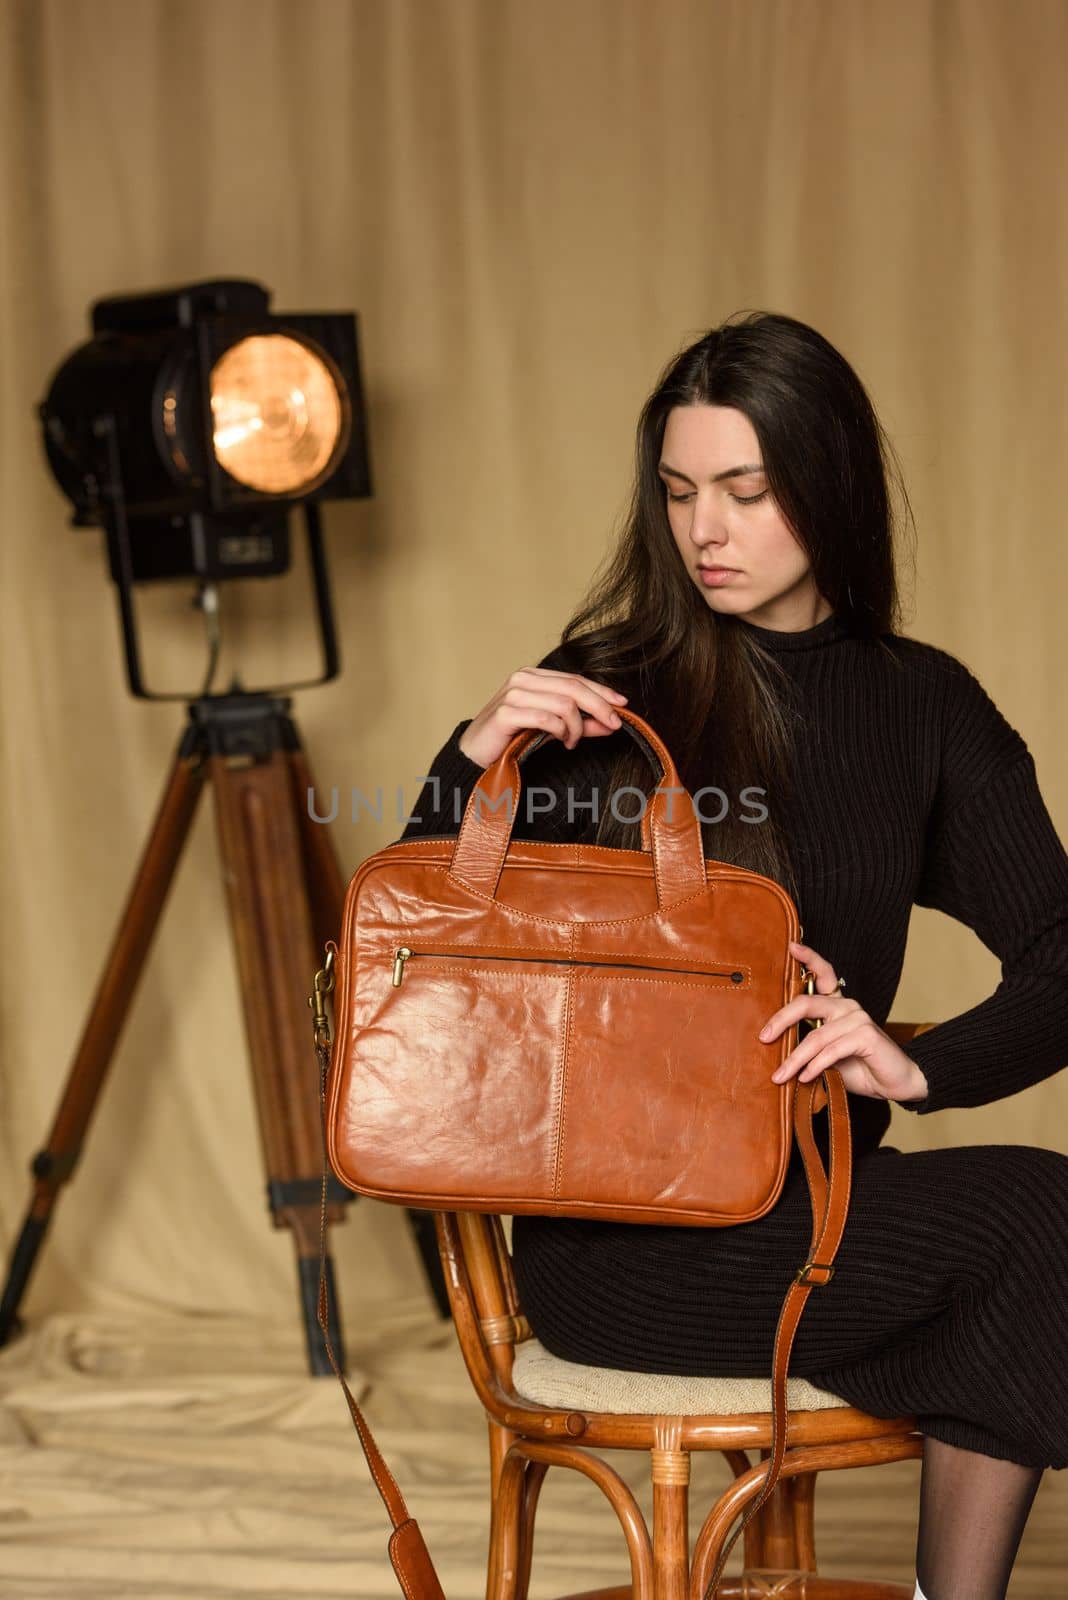 photo of a woman with a orange leather backpack with antique and retro look. indoors photo by Ashtray25